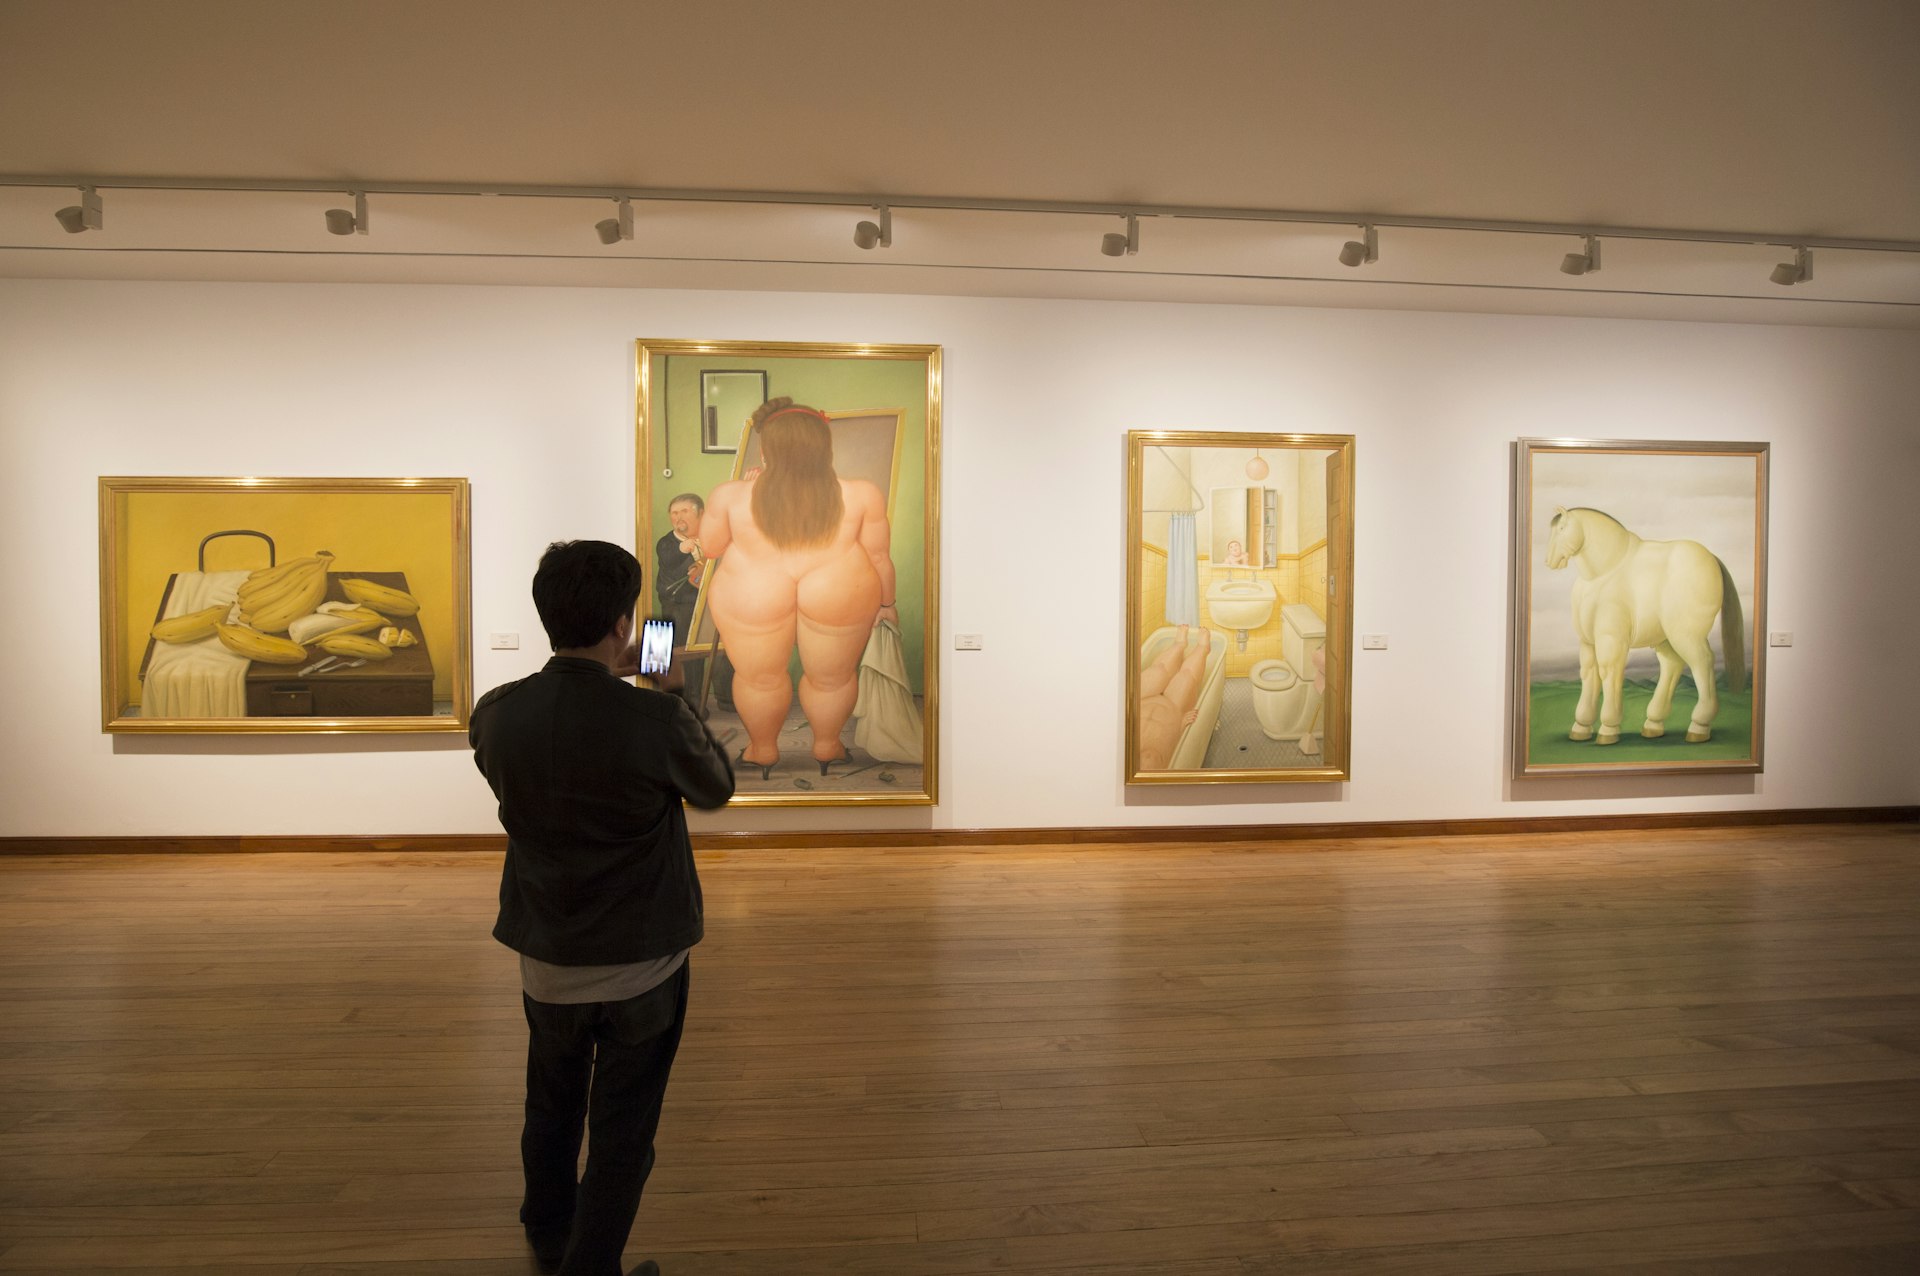 A man takes photos of works of art by Fernando Botero at the Museo Botero, Bogotá, Colombia, South America